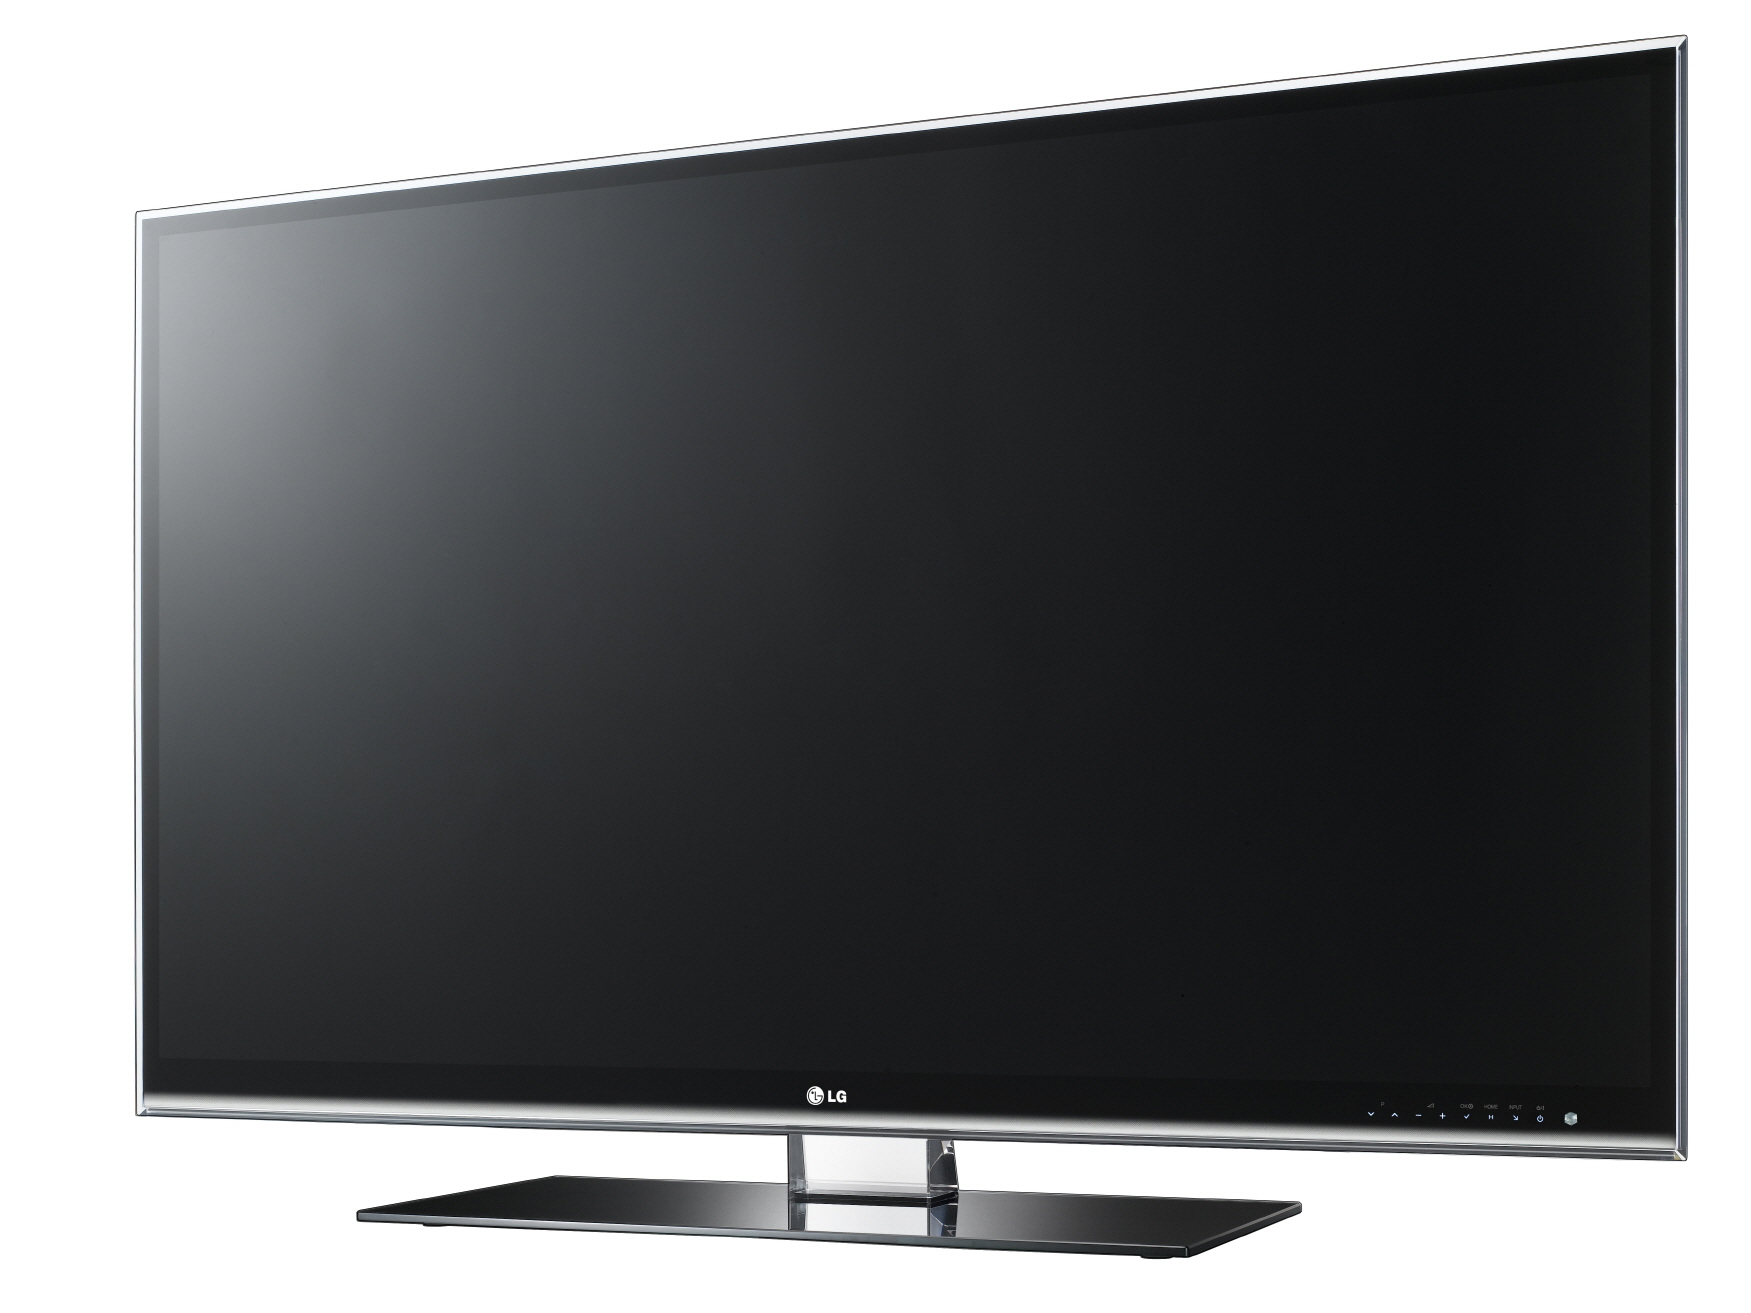 Right-side view of LG 3D TV model LW980S